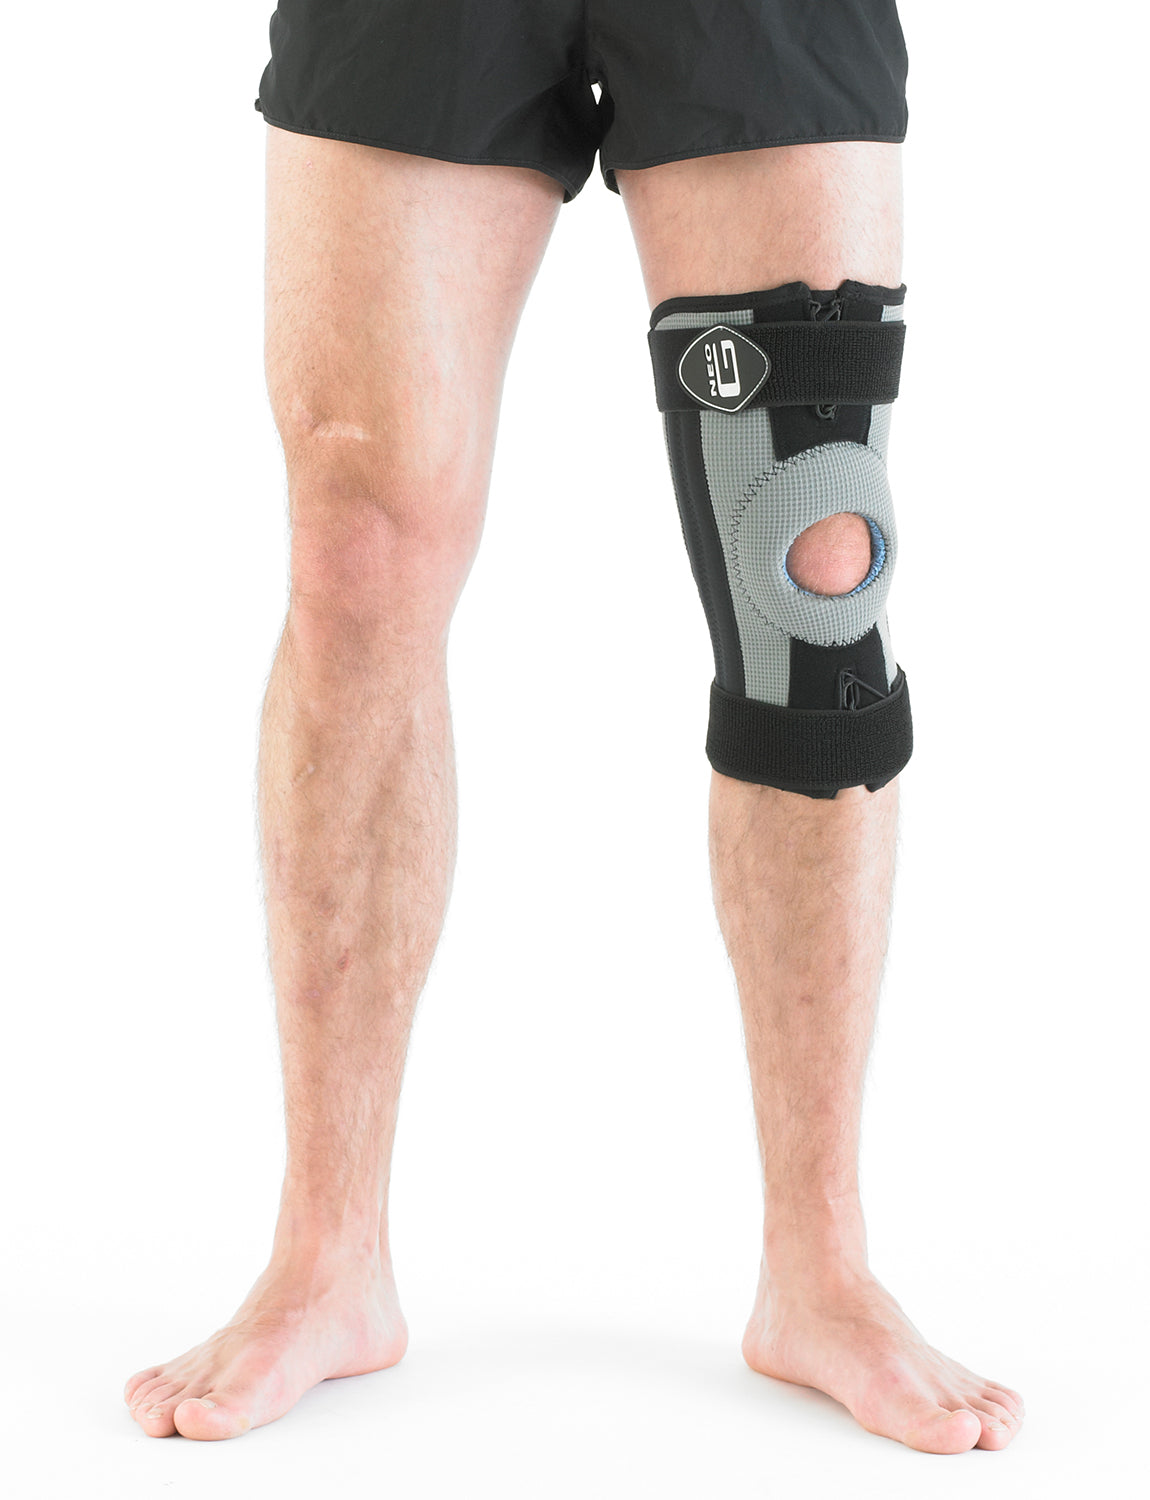 Rehab Xcelerator Stabilized Knee Support